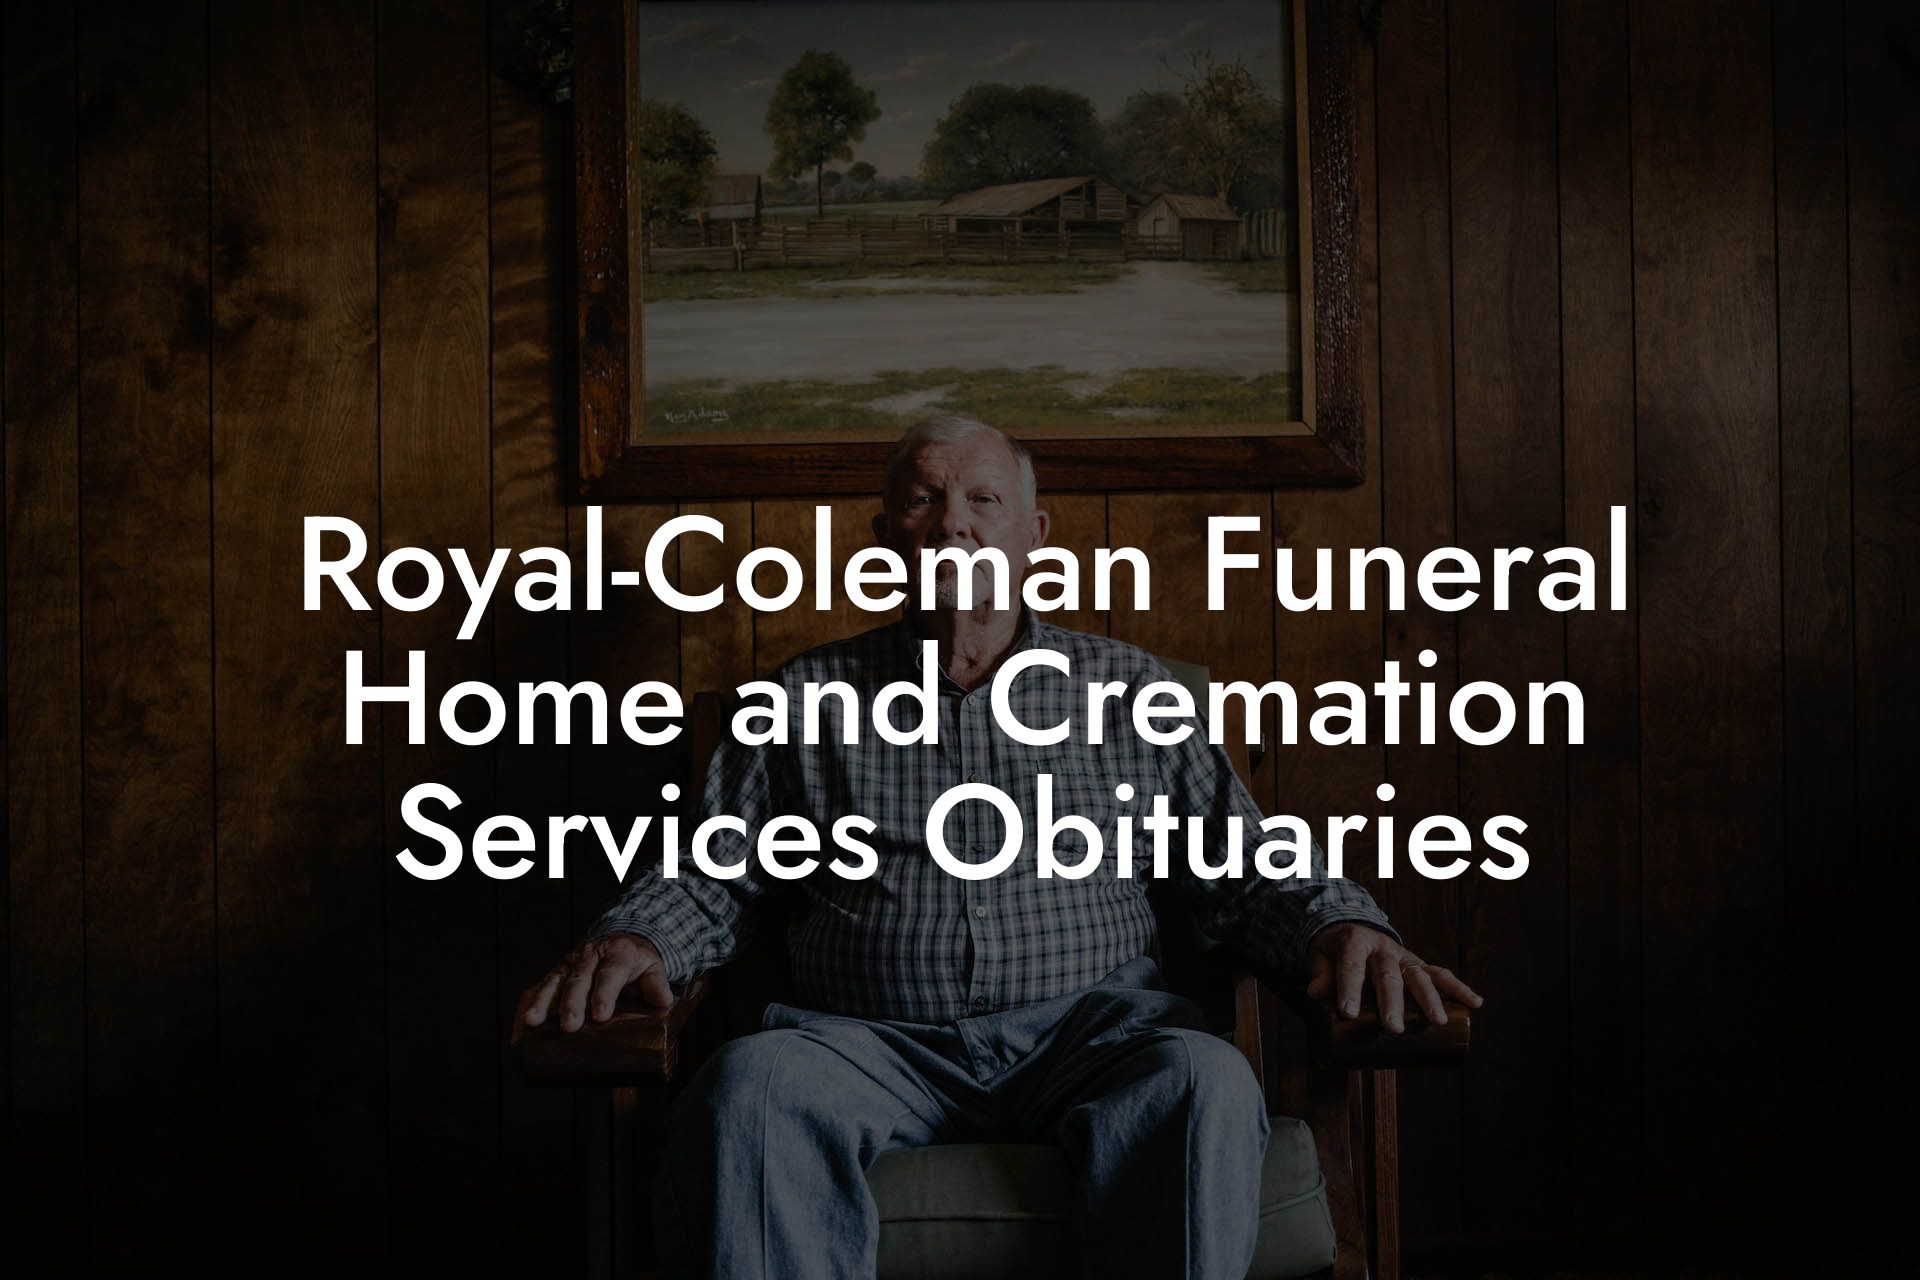 Royal-Coleman Funeral Home and Cremation Services Obituaries